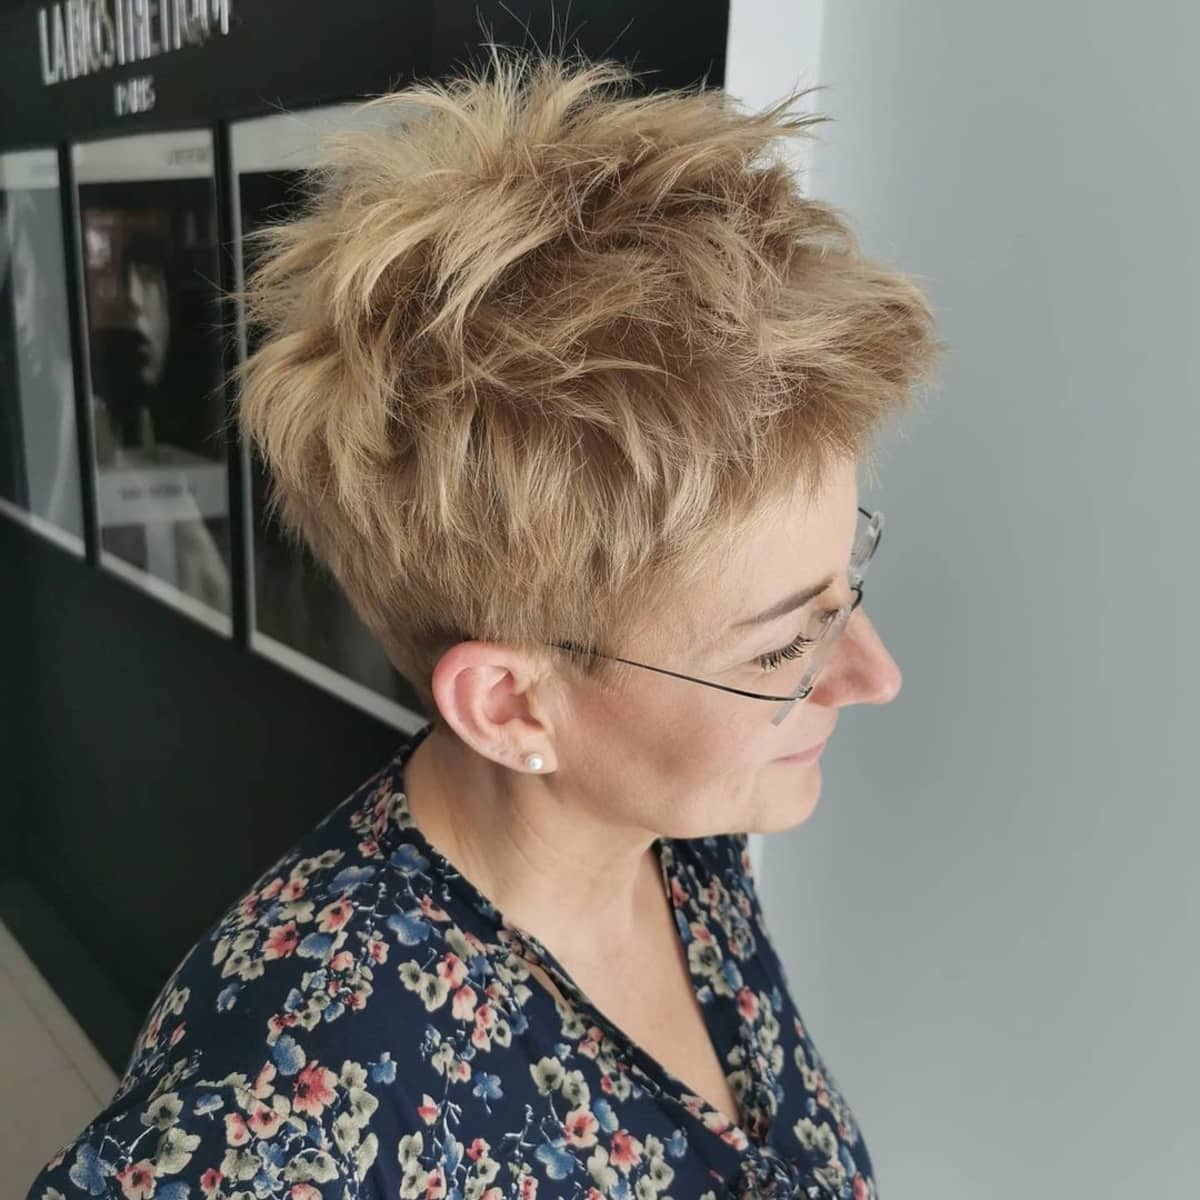 Edgy spiky pixie cut for ladies over 60